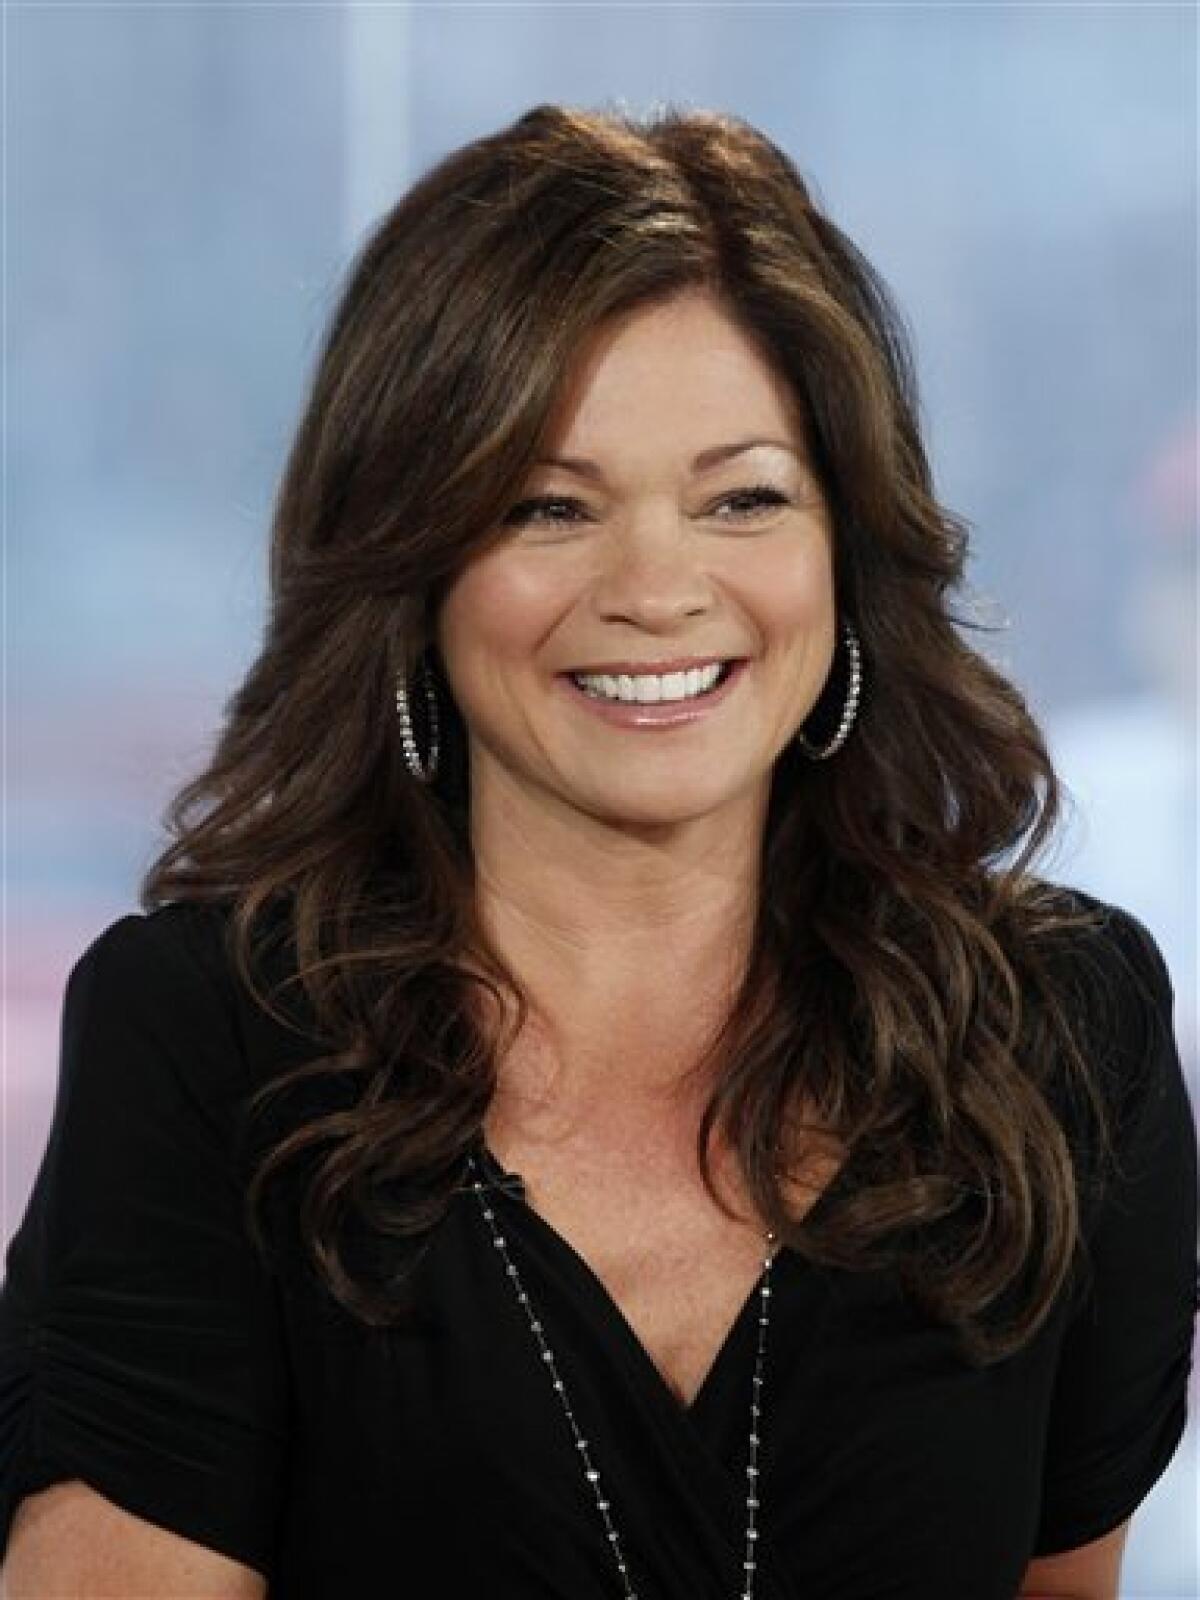 'Hot in Cleveland' star Valerie Bertinelli marries The San Diego